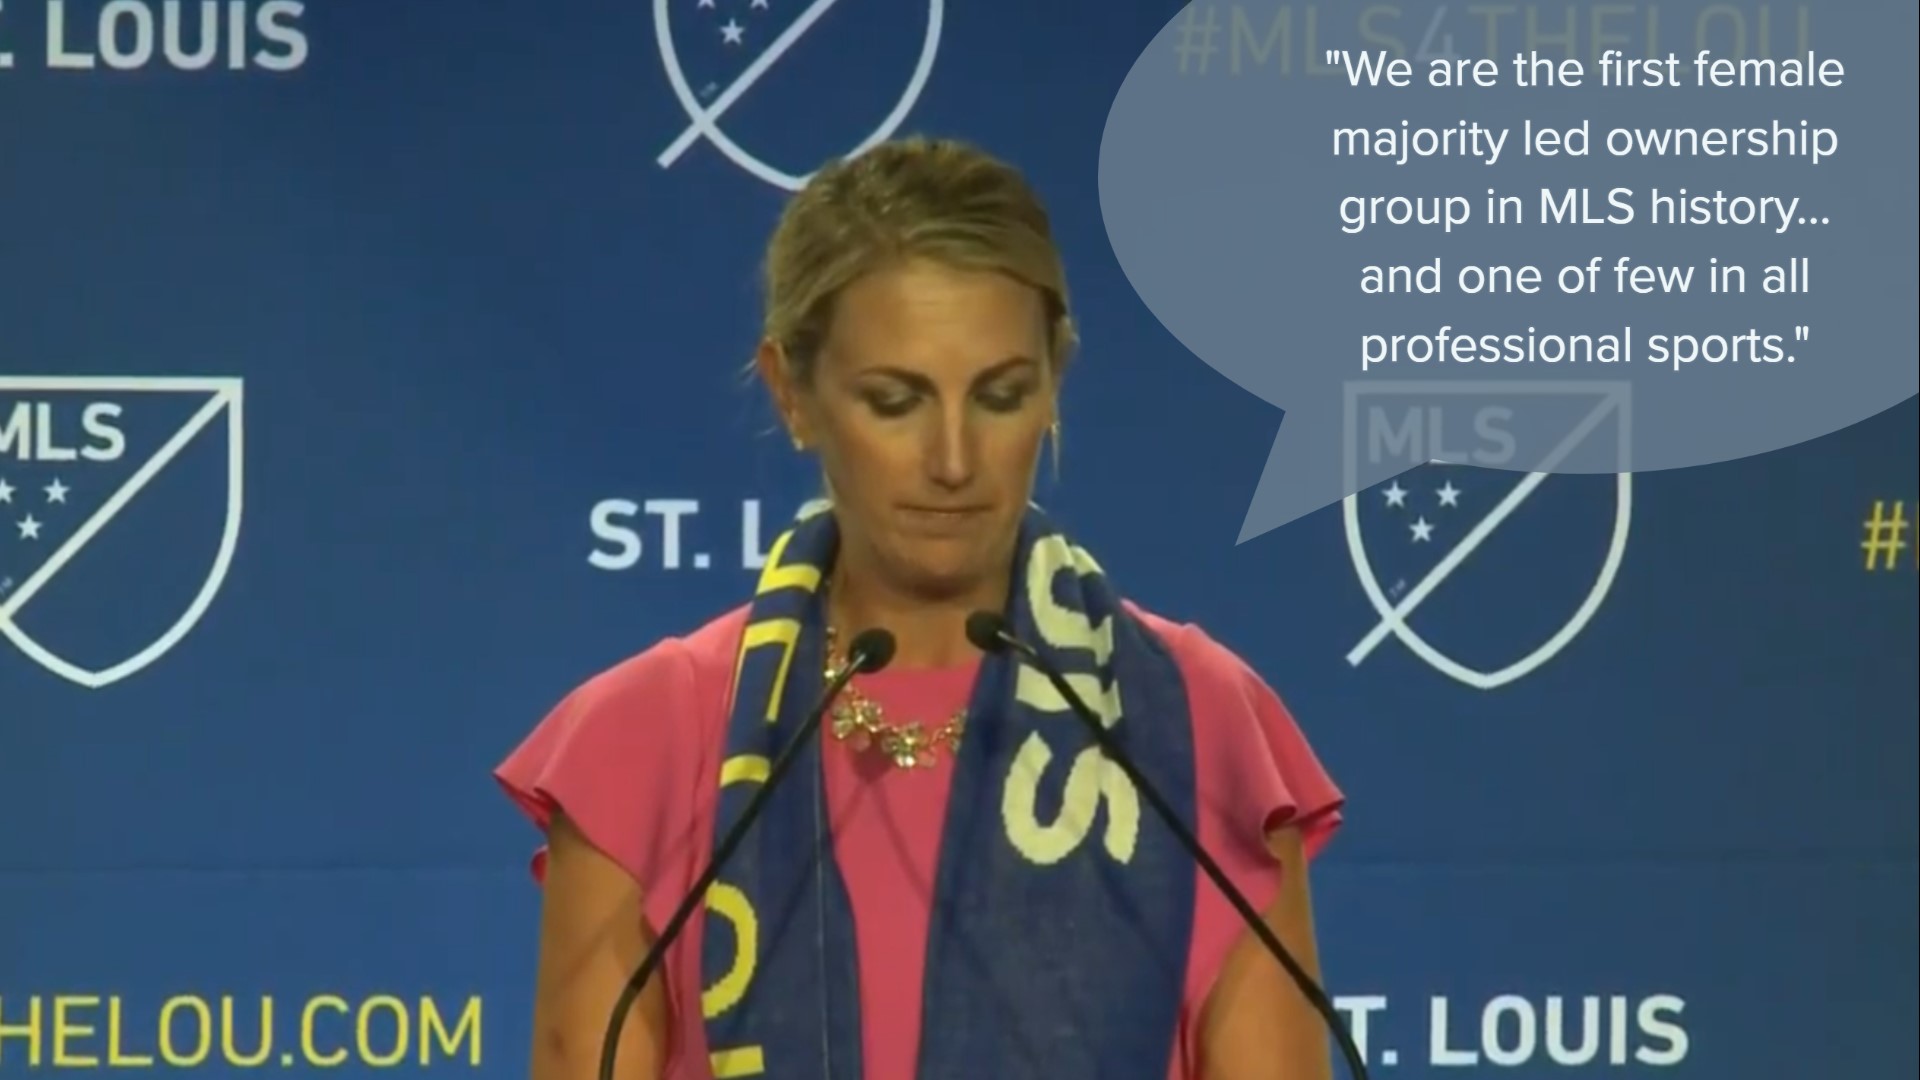 Carolyn Kindle Betz talked with Frank Cusumano following the MLS press conference.